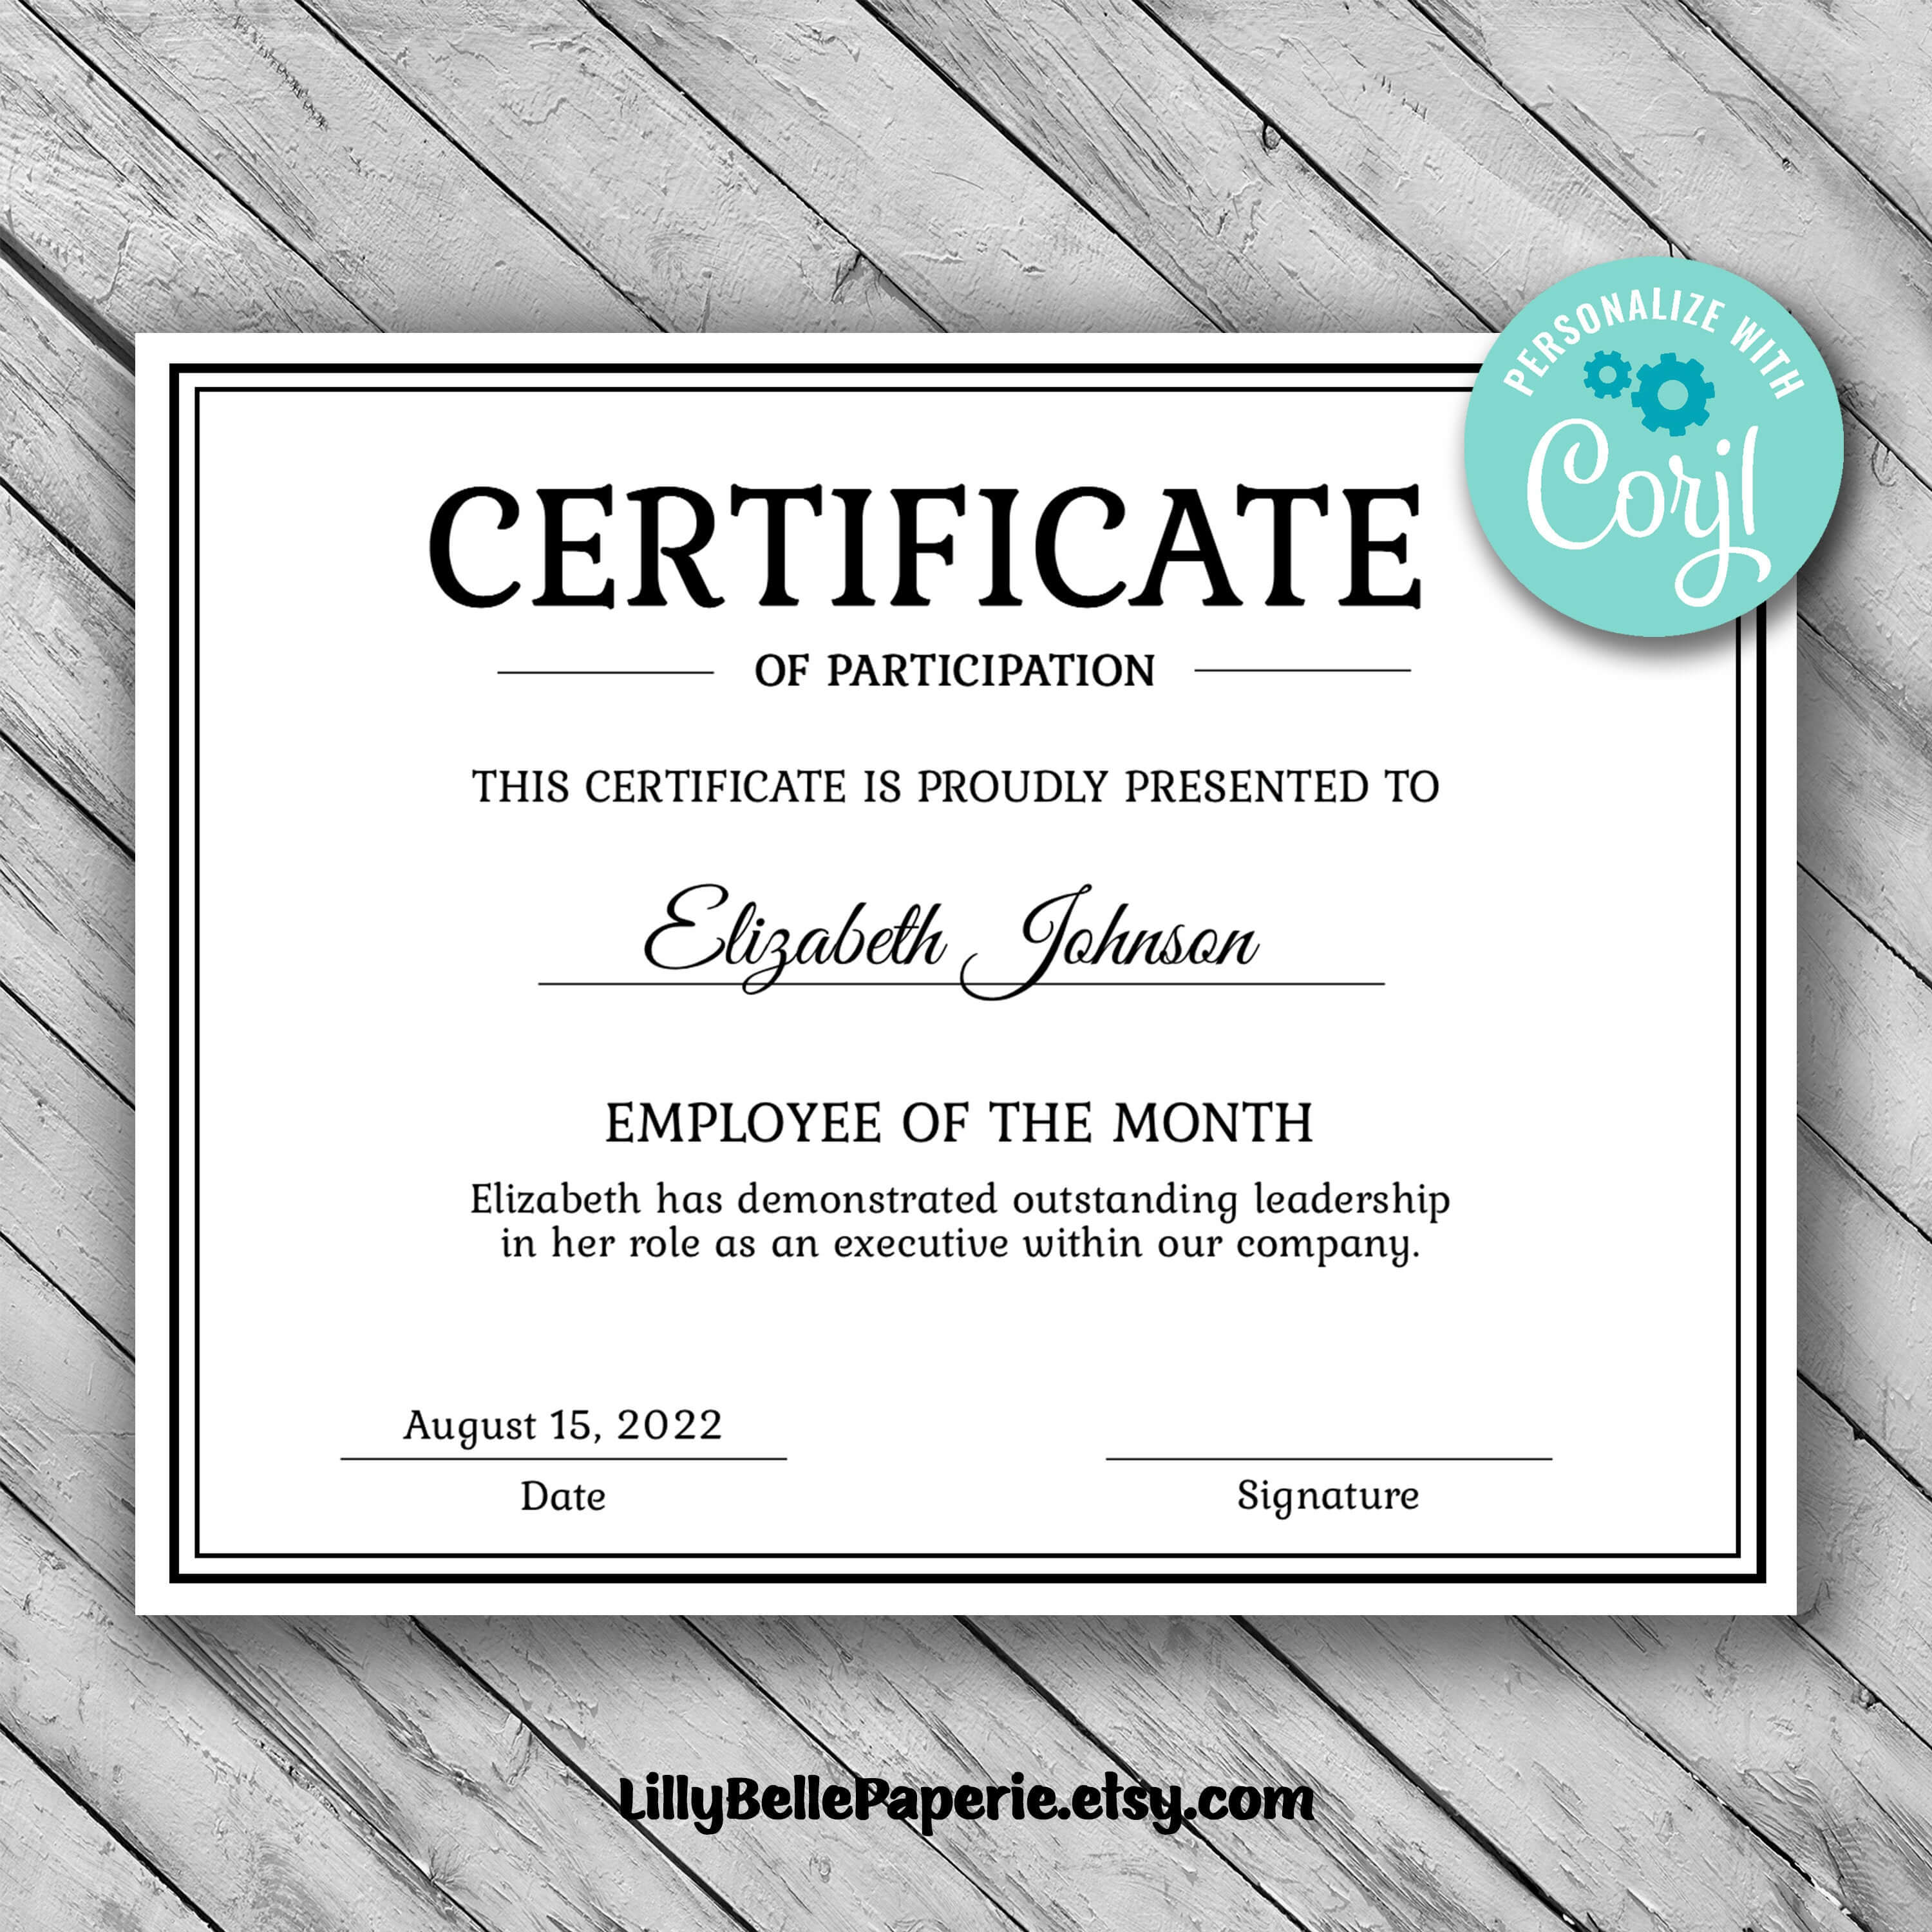 Editable Certificate Template – Employee Of The Month Certificate Template  – Template – Boss Manager Office Worker Employer Instant Download Within Manager Of The Month Certificate Template